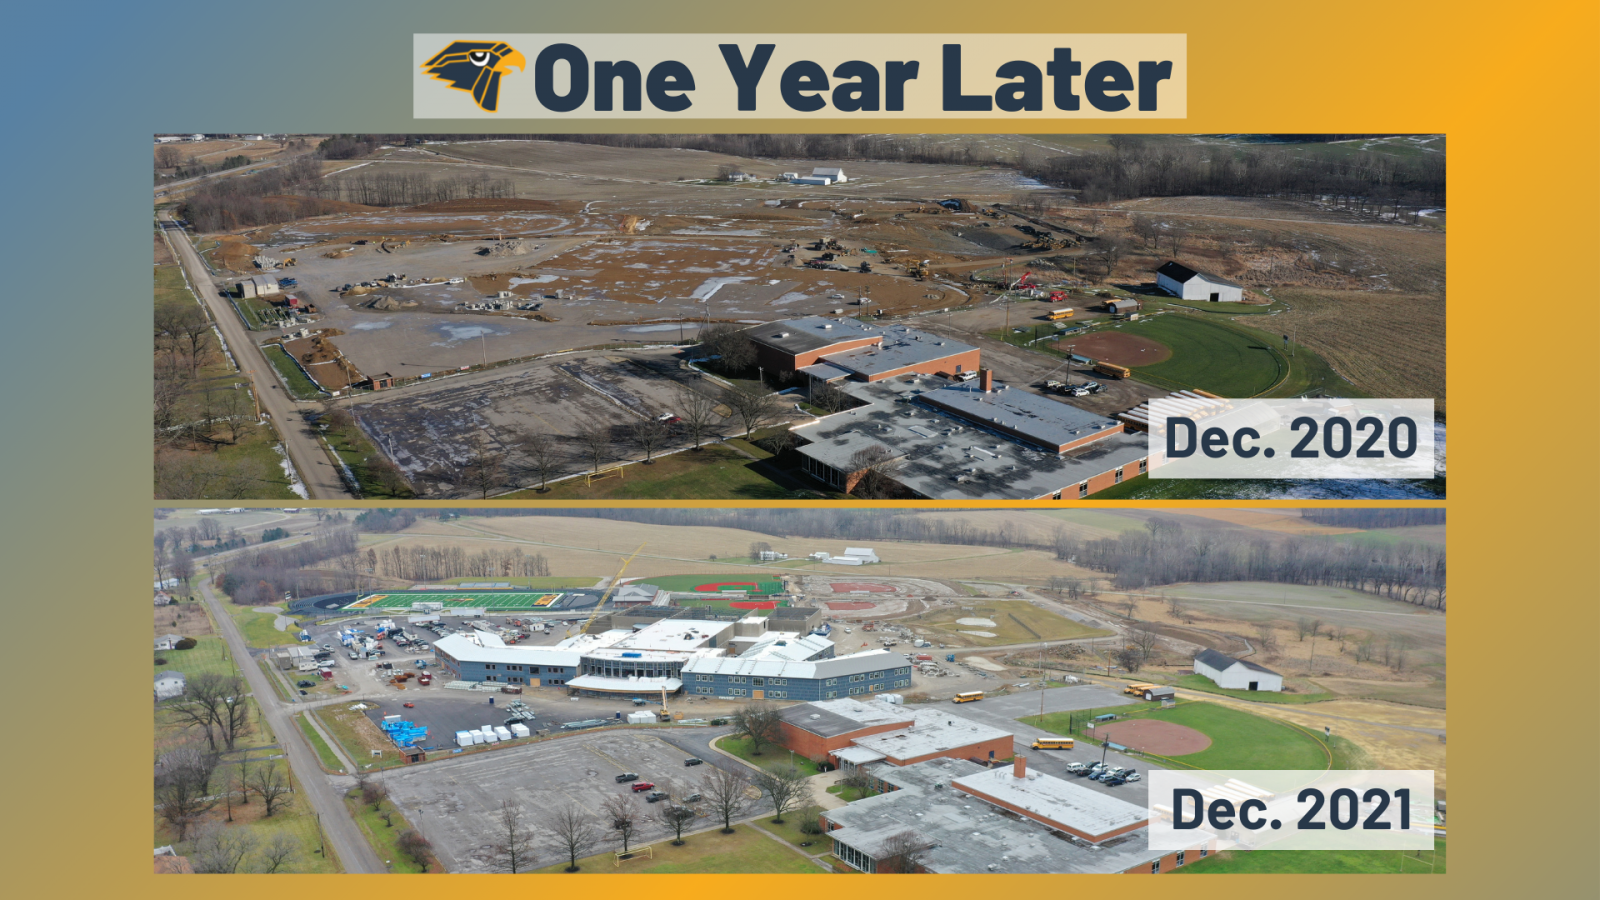 "One Year Later: December 2020-December 2021" A graphic with a side-by-side comparison from the same vantage point of Hillsdale's new campus under construction.